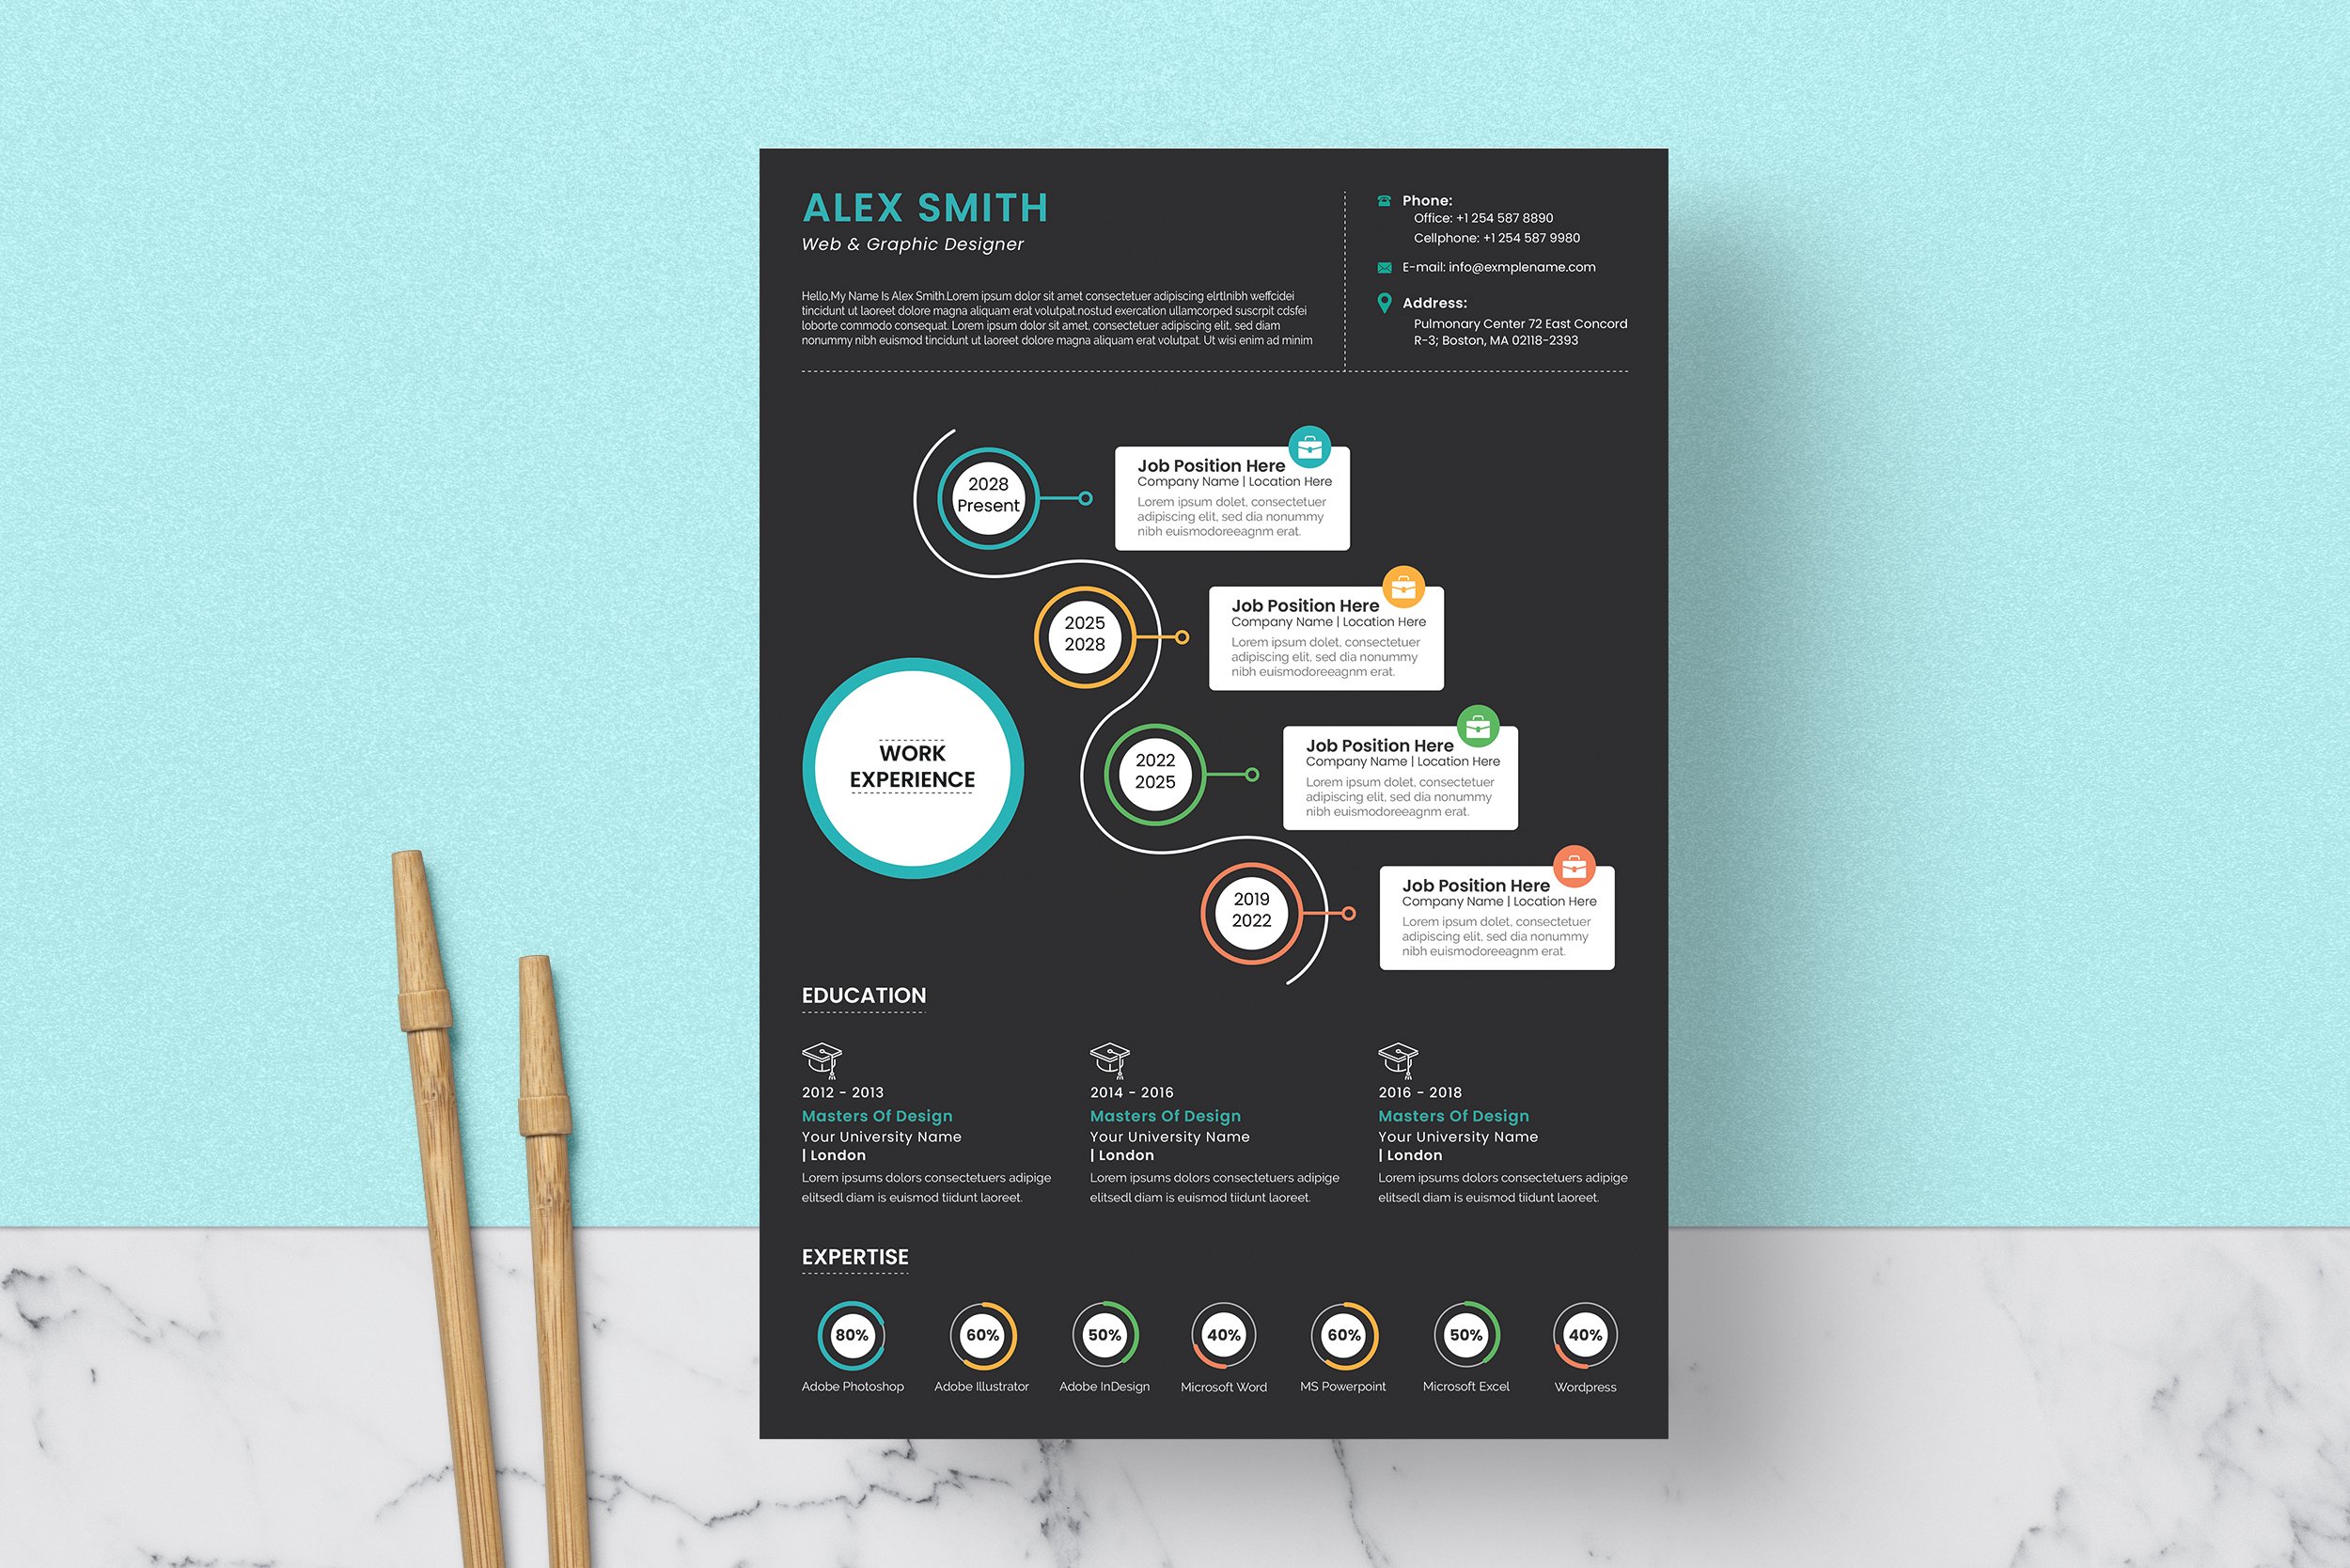 Infographic Resume/CV preview image.